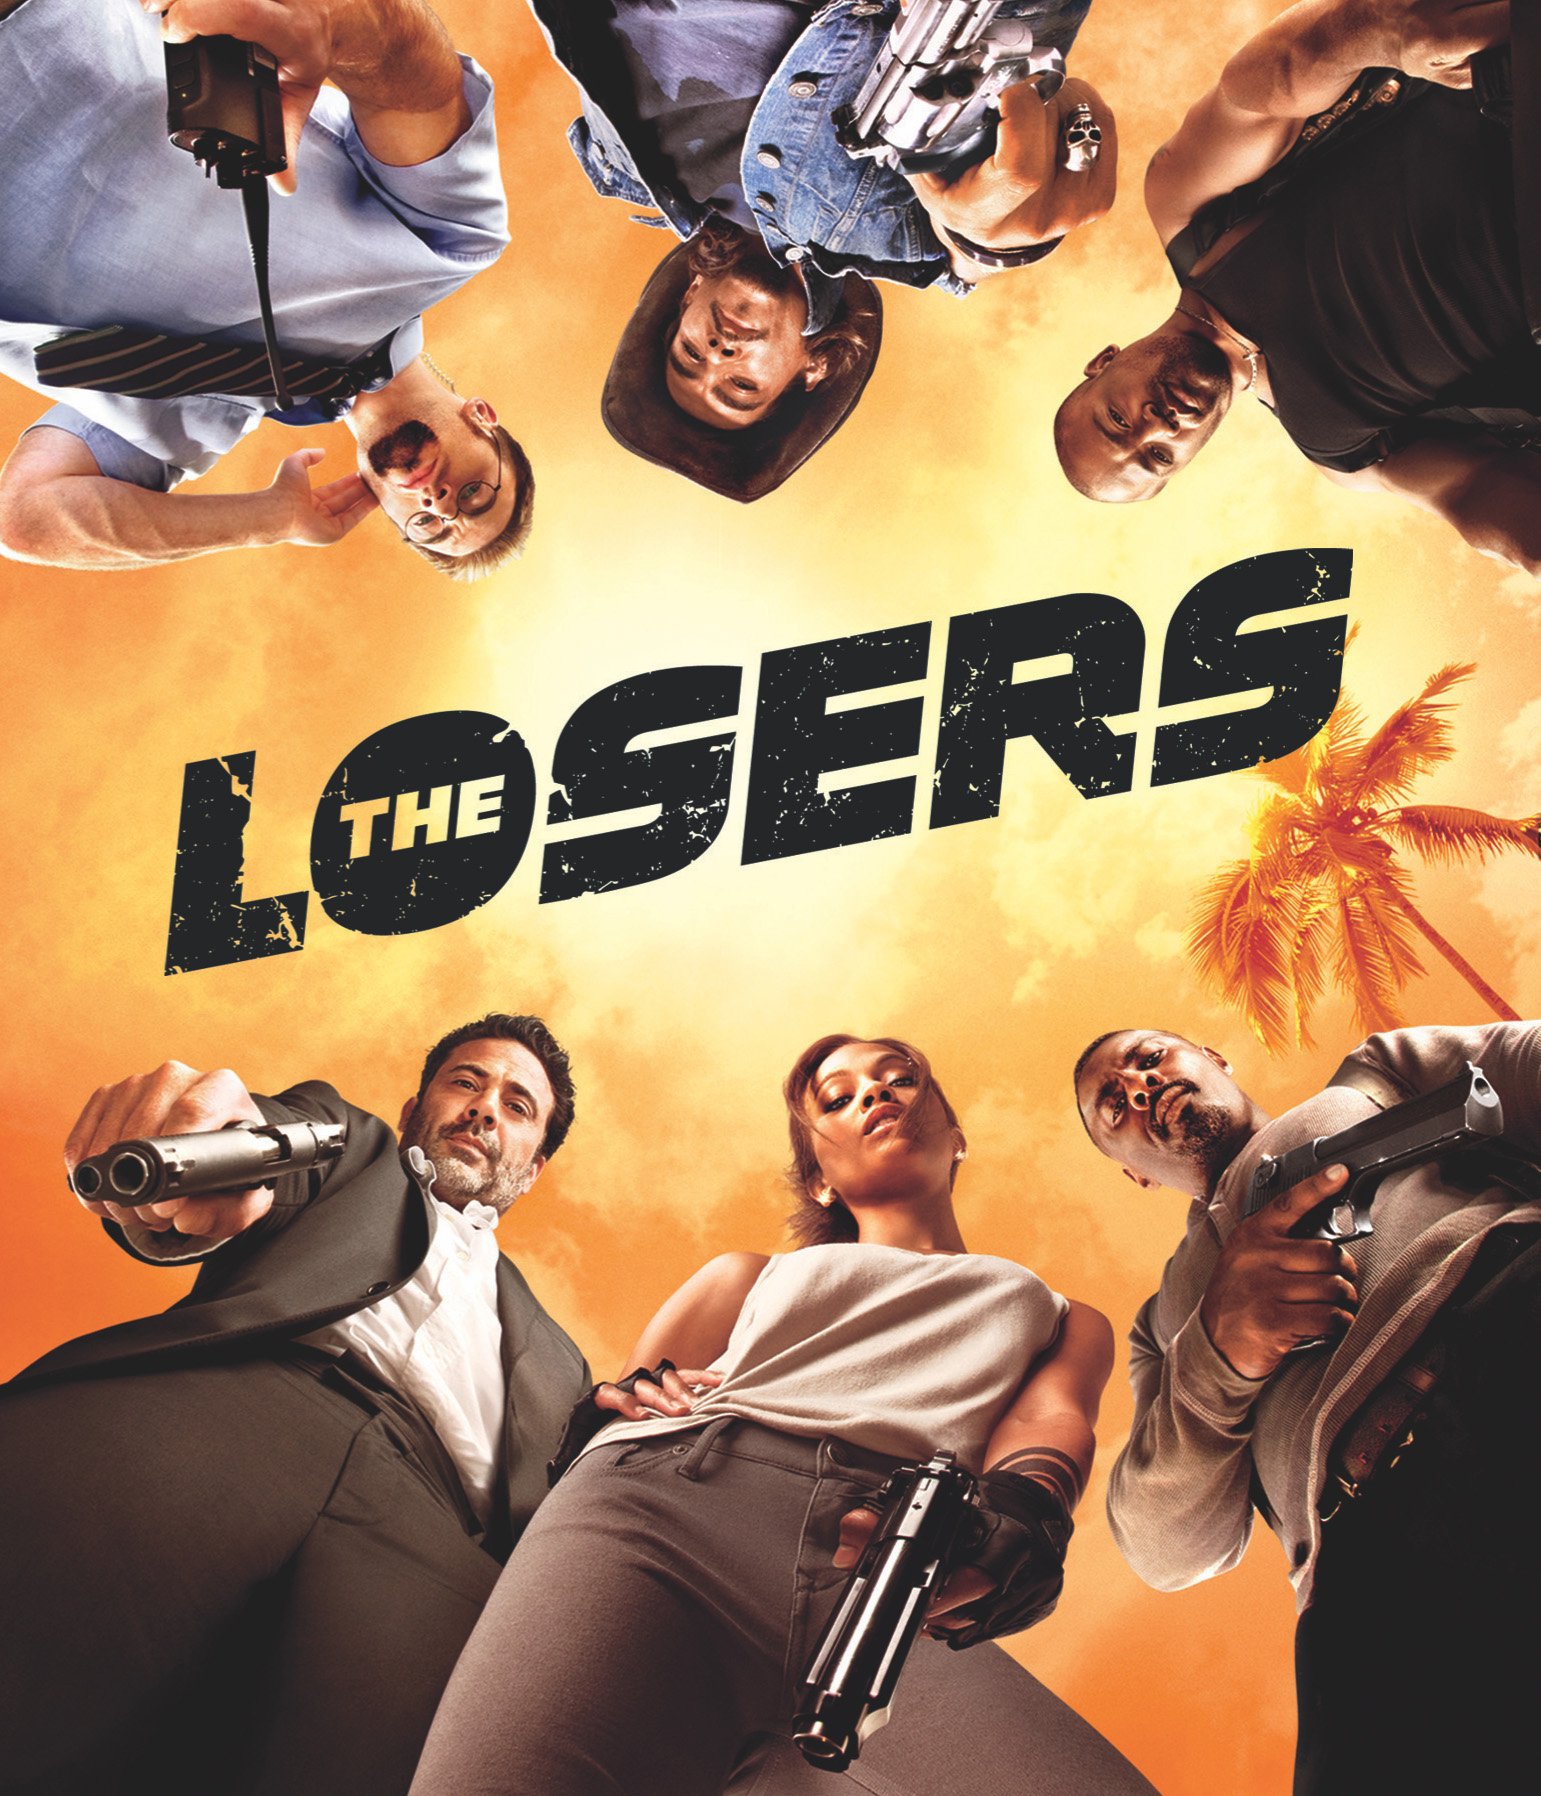 the-losers-movie-purchase-or-watch-online